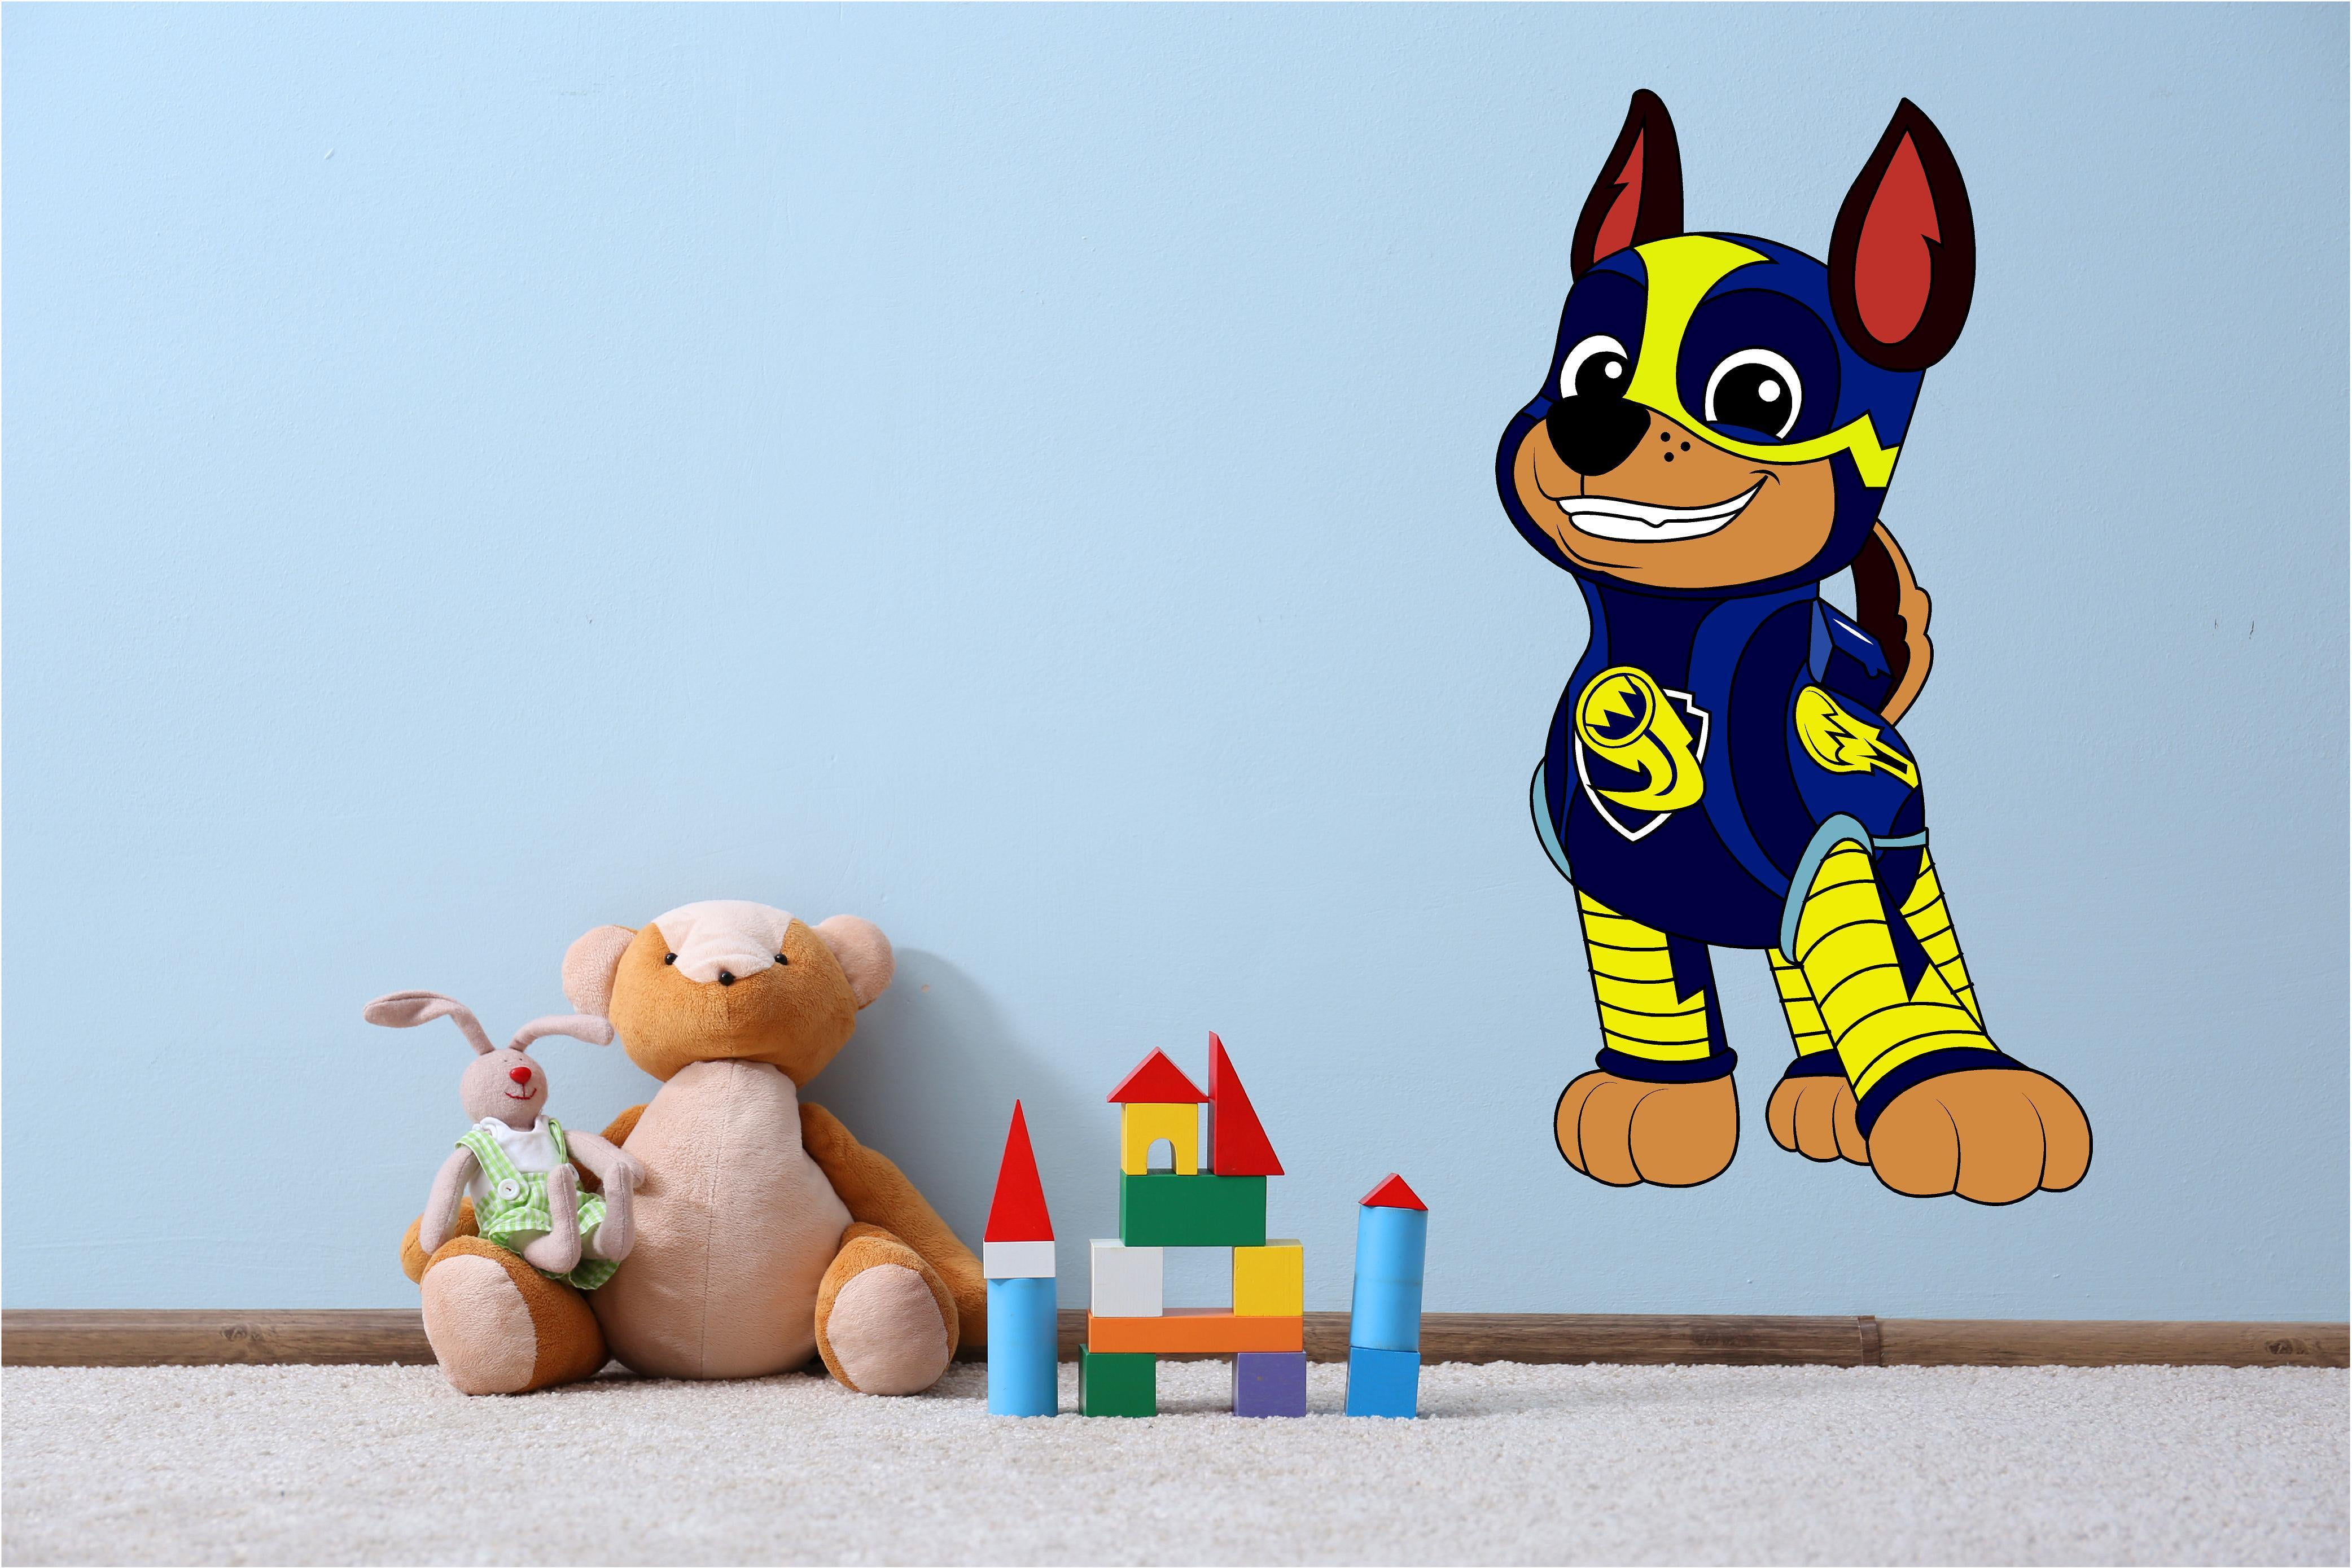 4 Inch Chase Paw Patrol Pup Wall Decal Sticker Pups Puppy Puppies Dog Dogs Removable Peel Self Stick Adhesive Vinyl Decorative Art Kids Room Home Decor Children 3 x 4 inches 